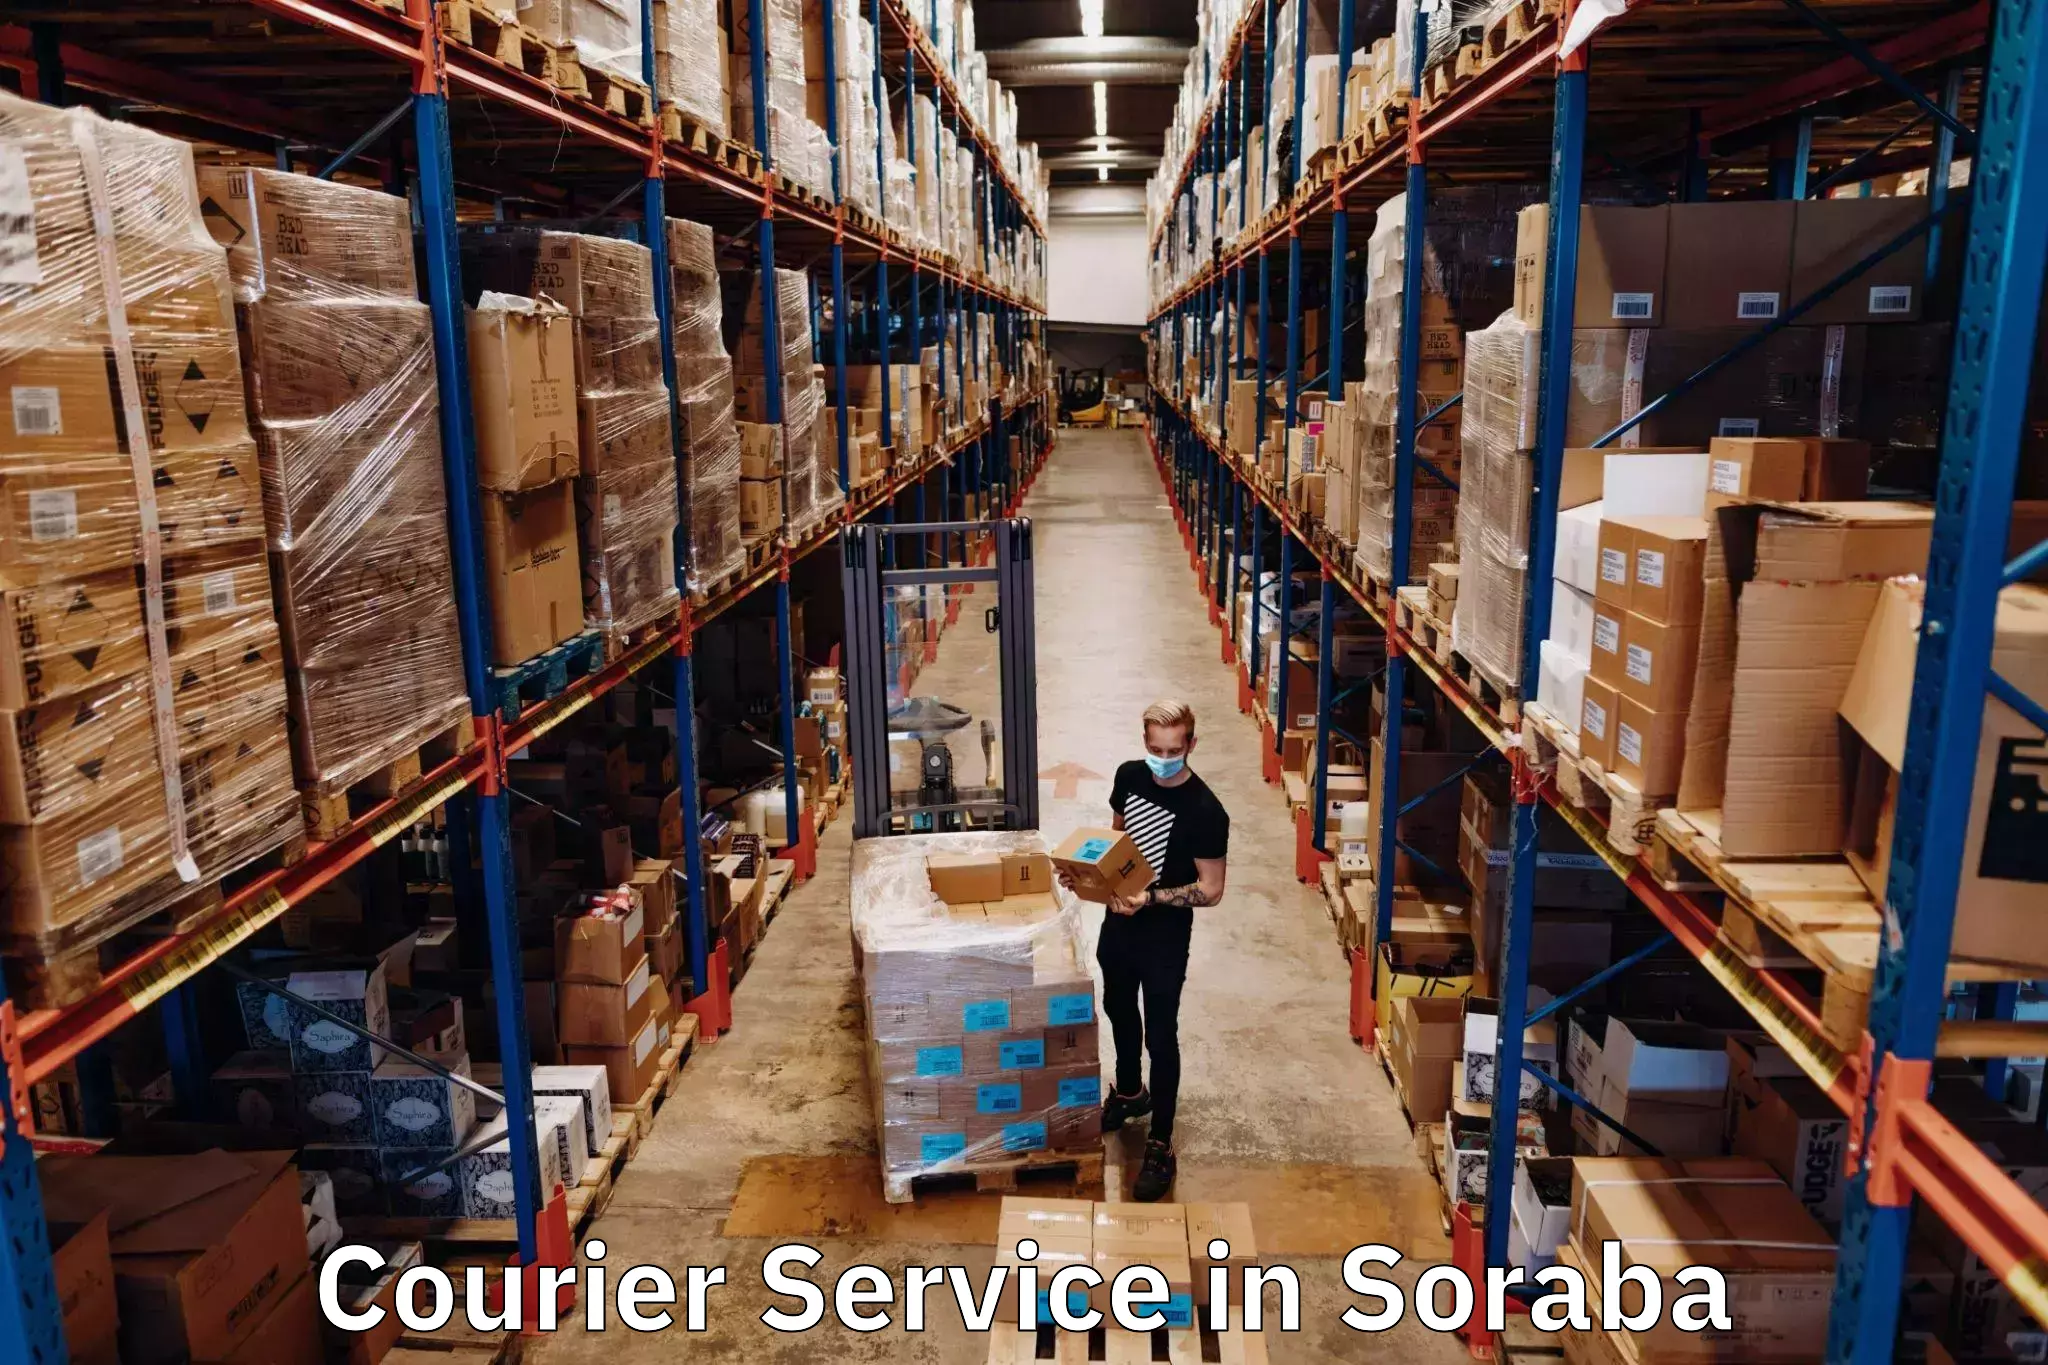 Courier services in Soraba